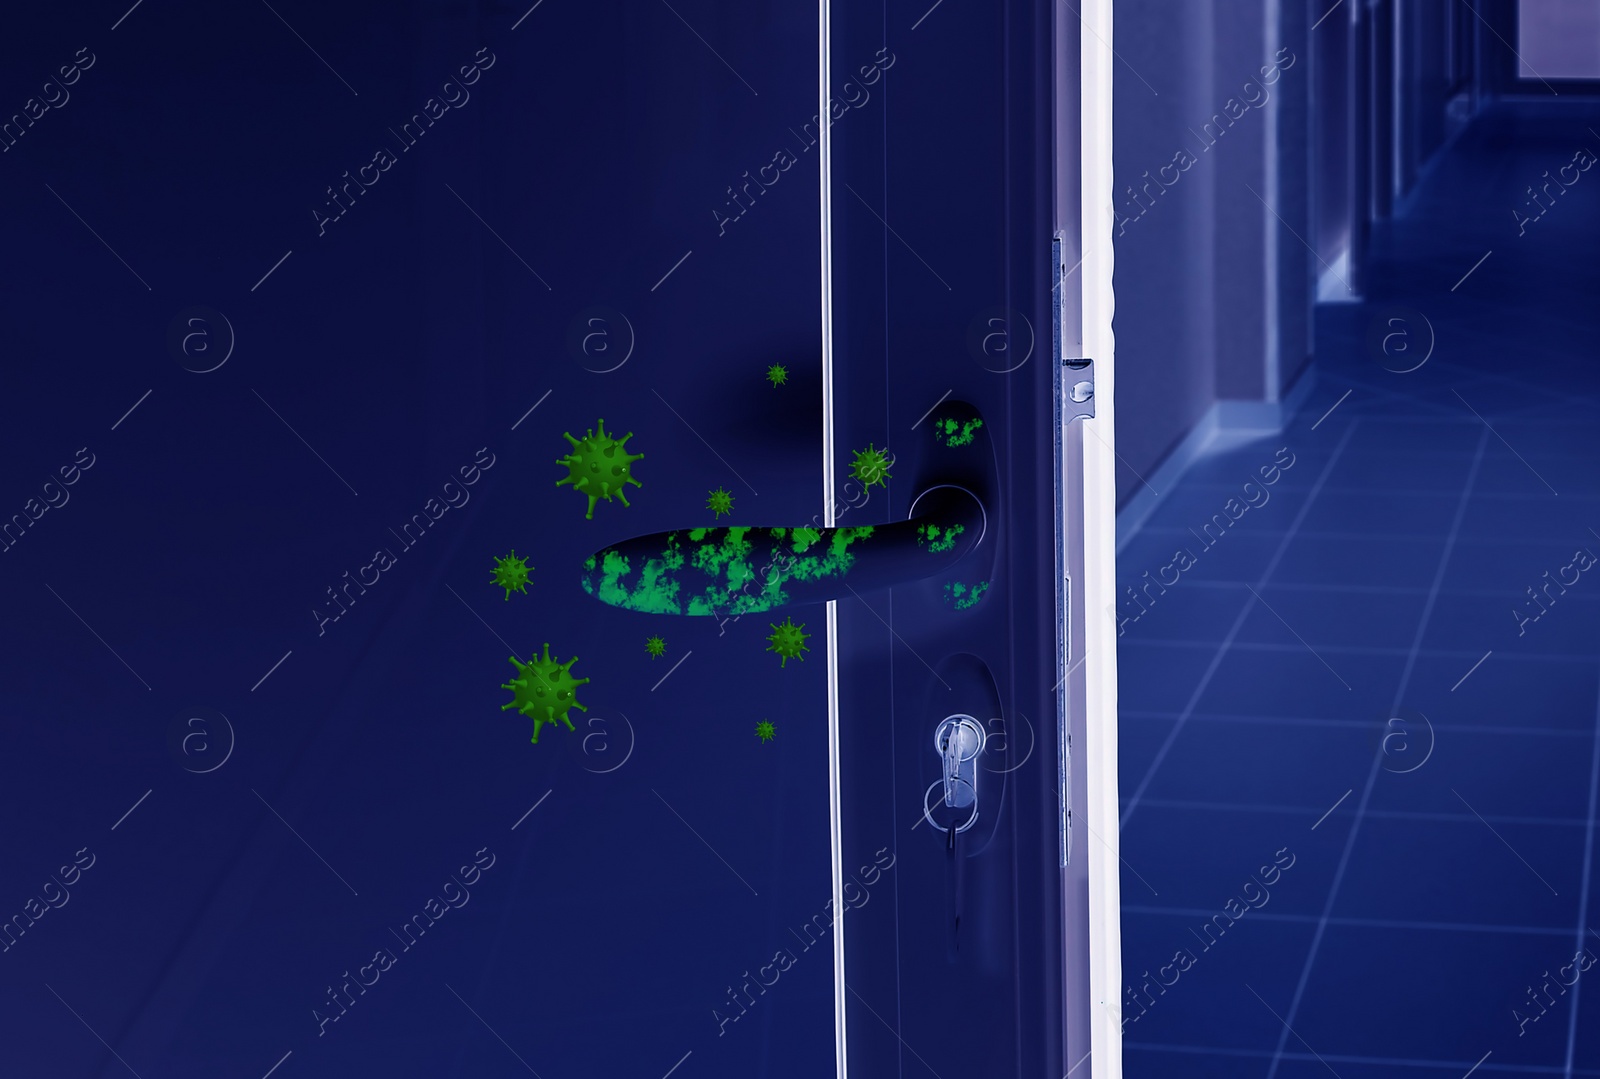 Image of Abstract illustration of virus and dirty door handle, closeup view under UV light. Avoid touching surfaces in public spaces during coronavirus outbreak